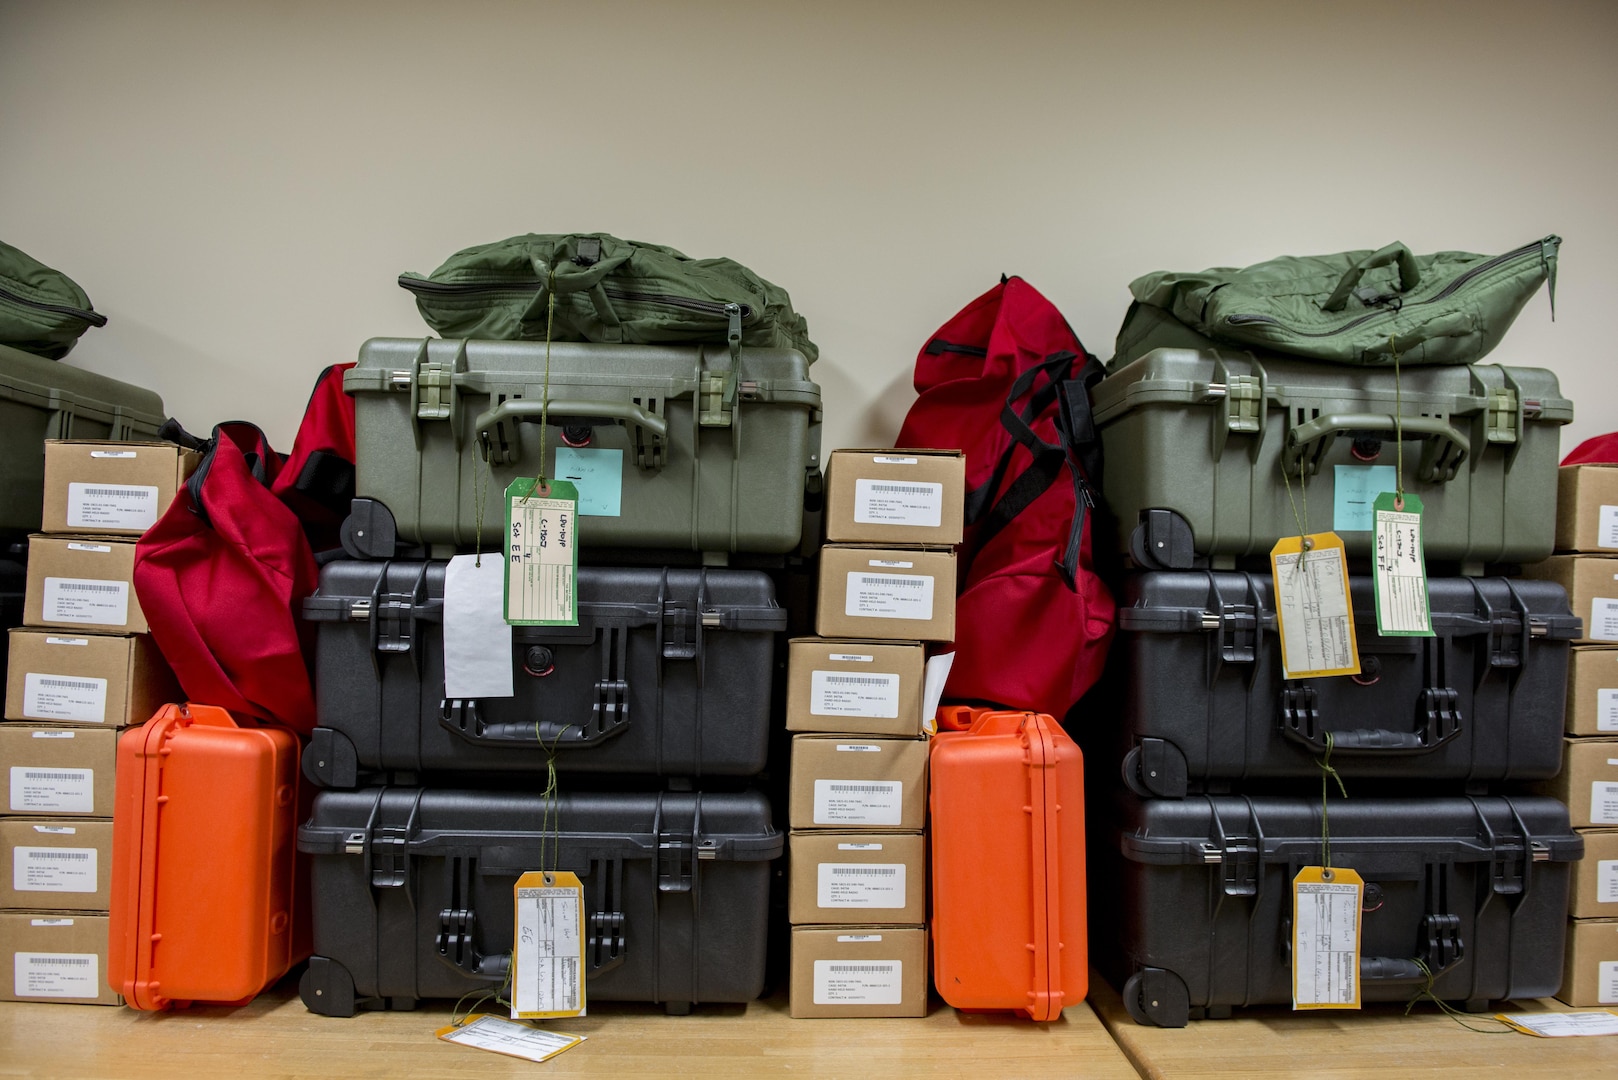 New life-support and survival equipment kits wait to be placed on new C-130J Super Hercules aircraft in the 374th Operations Support Squadron Aircrew Flight Equipment flight main shop Jan. 20, 2017, at Yokota Air Base, Japan. For the new C-130J aircraft scheduled to arrive at Yokota in 2017, brand-new aircrew life-support and survival equipment will also be supplied by the 374th AFE flight. (U.S. Air Force photo by Airman 1st Class Donald Hudson)